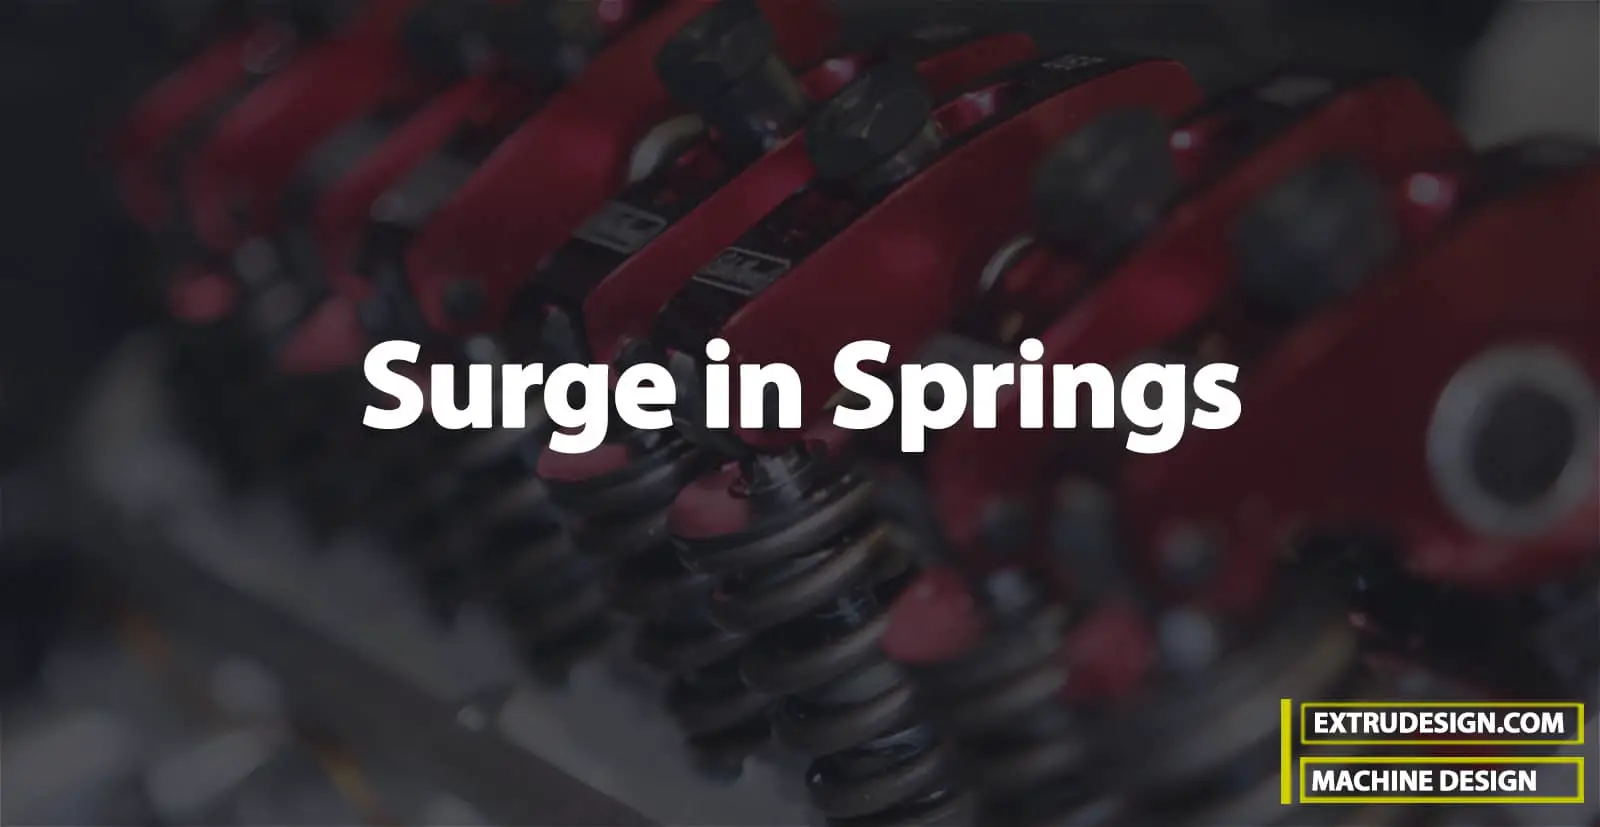 https://extrudesign.com/what-is-surge-in-springs/